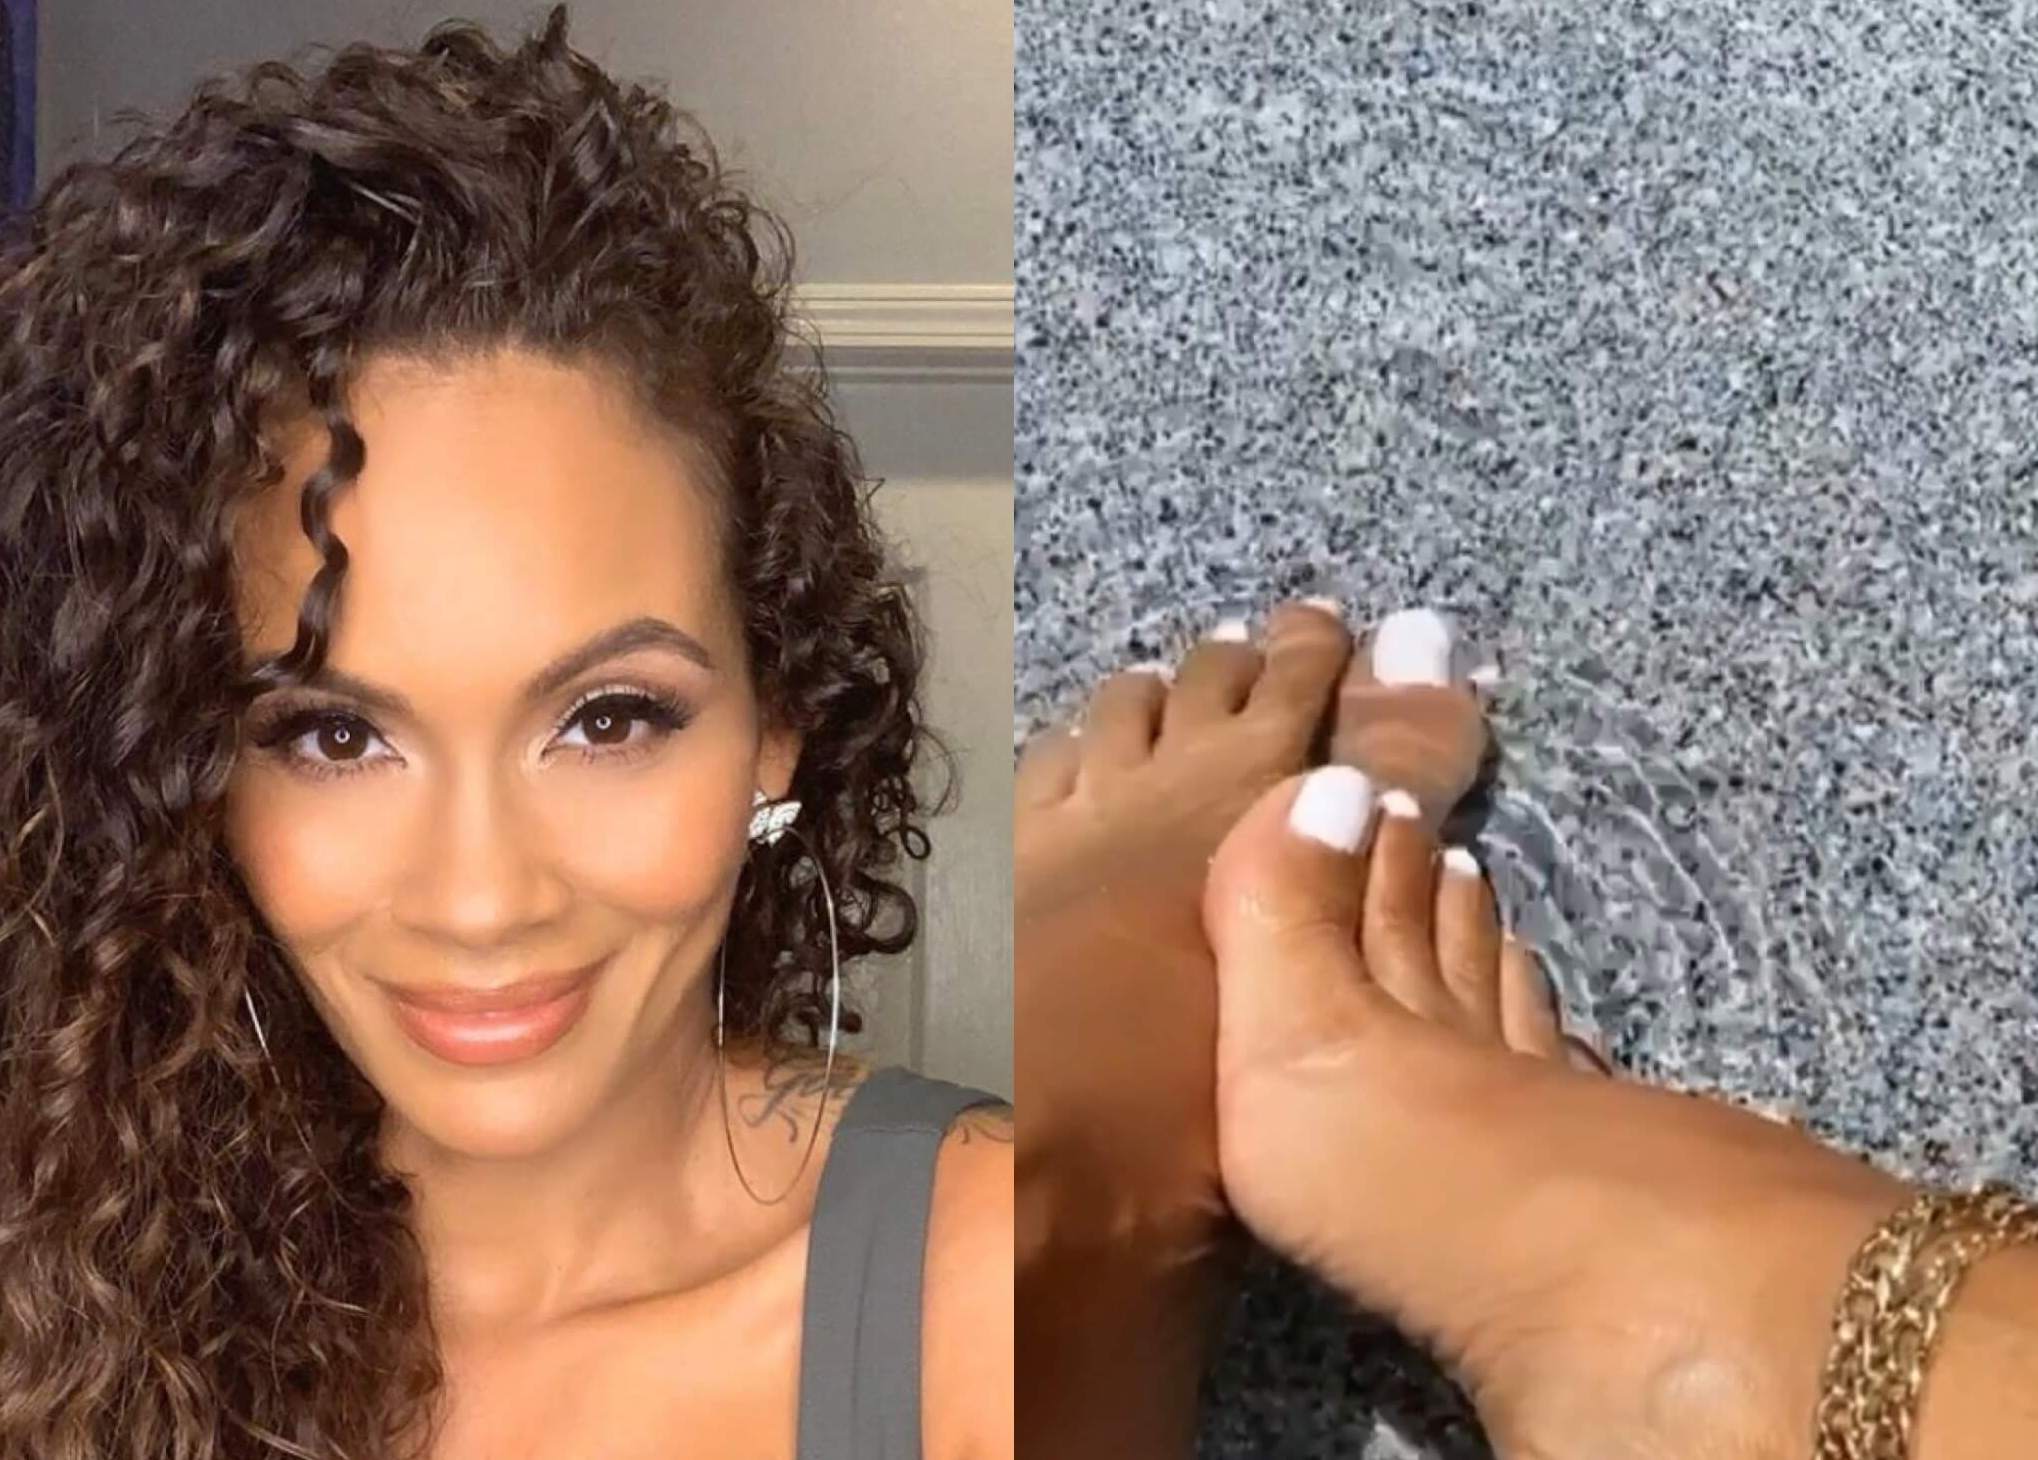 Foot only fans